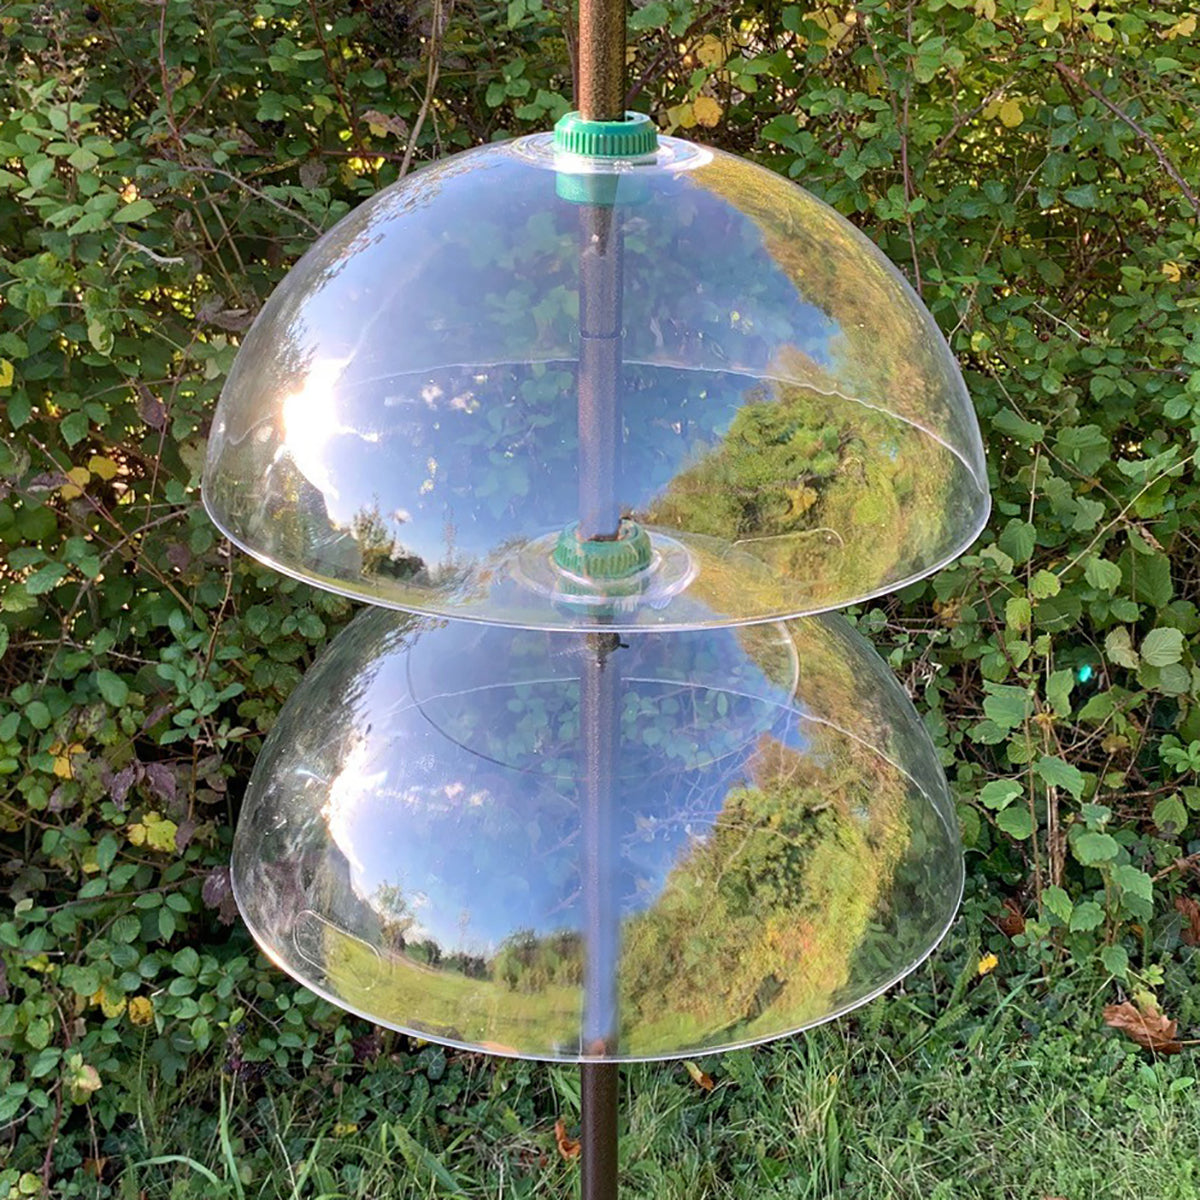 Squirrel Proof Baffle Protection for Wild Bird Feeders (Set of 2)